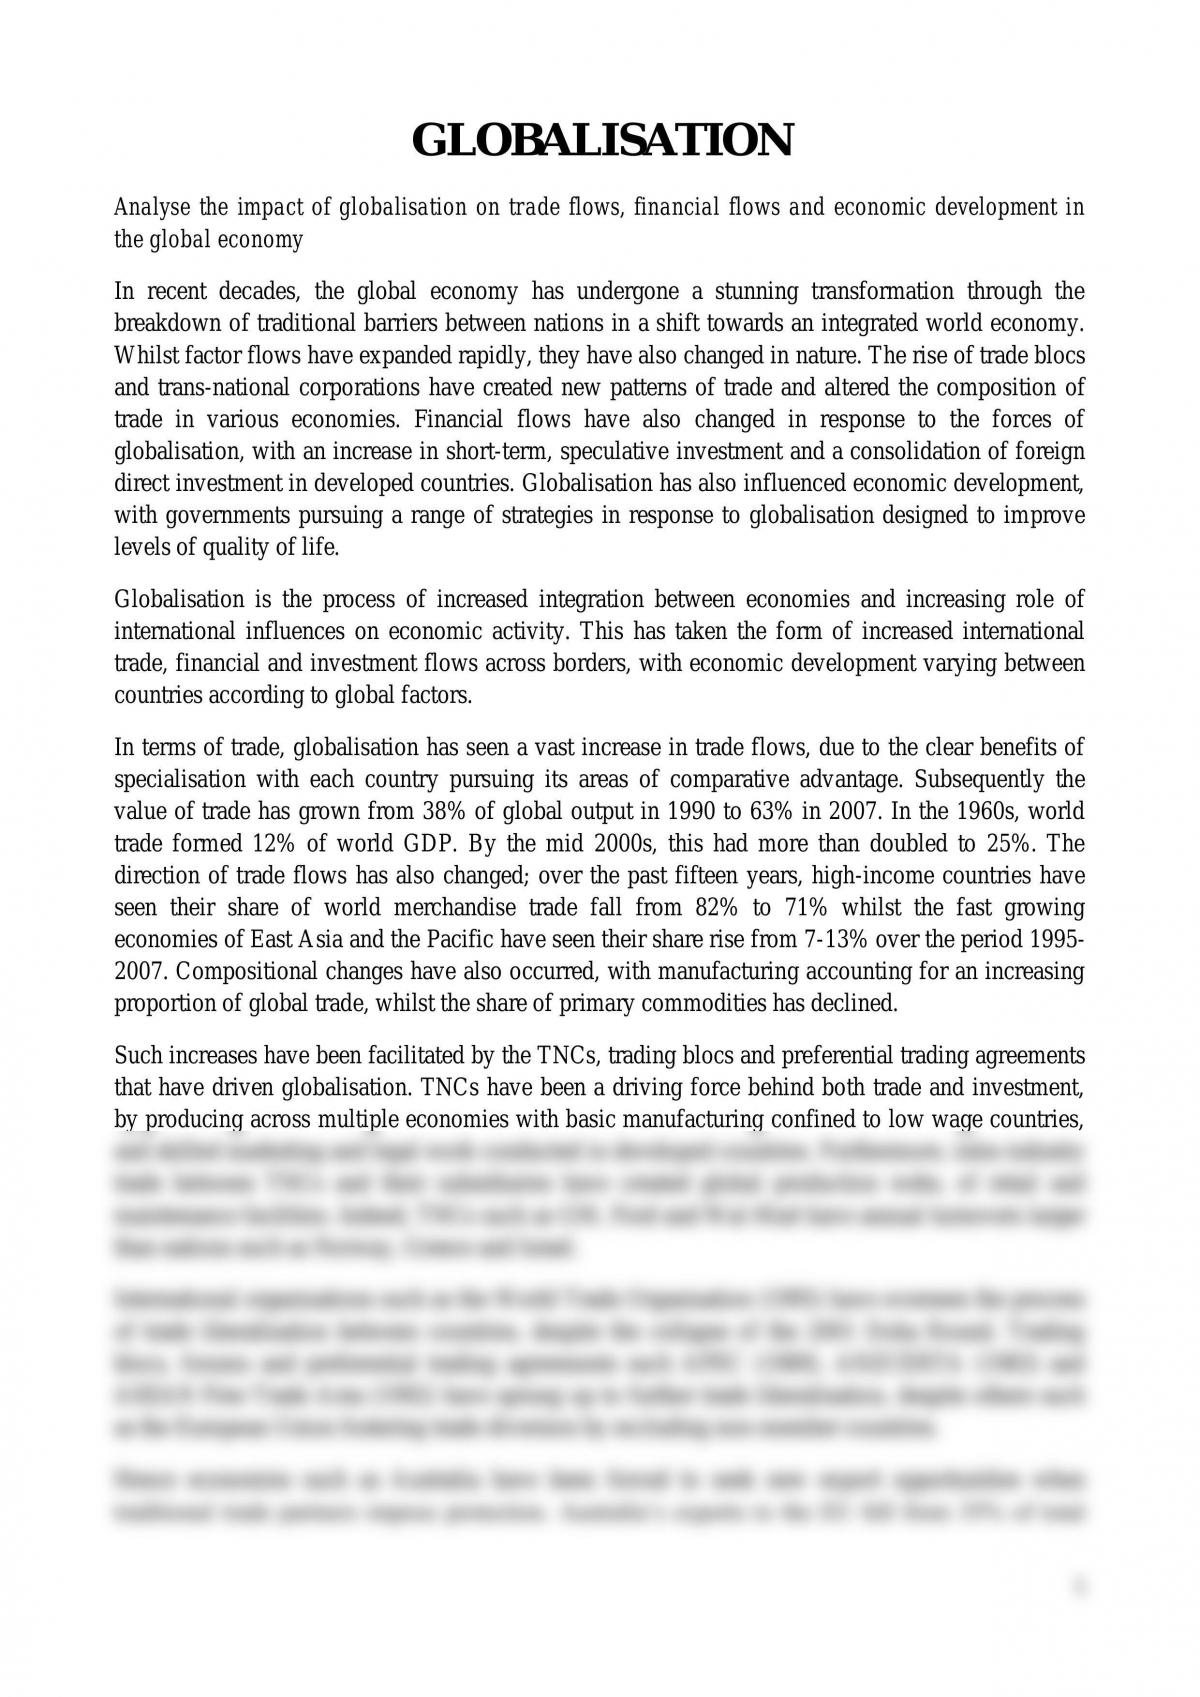 opinion essay about globalization